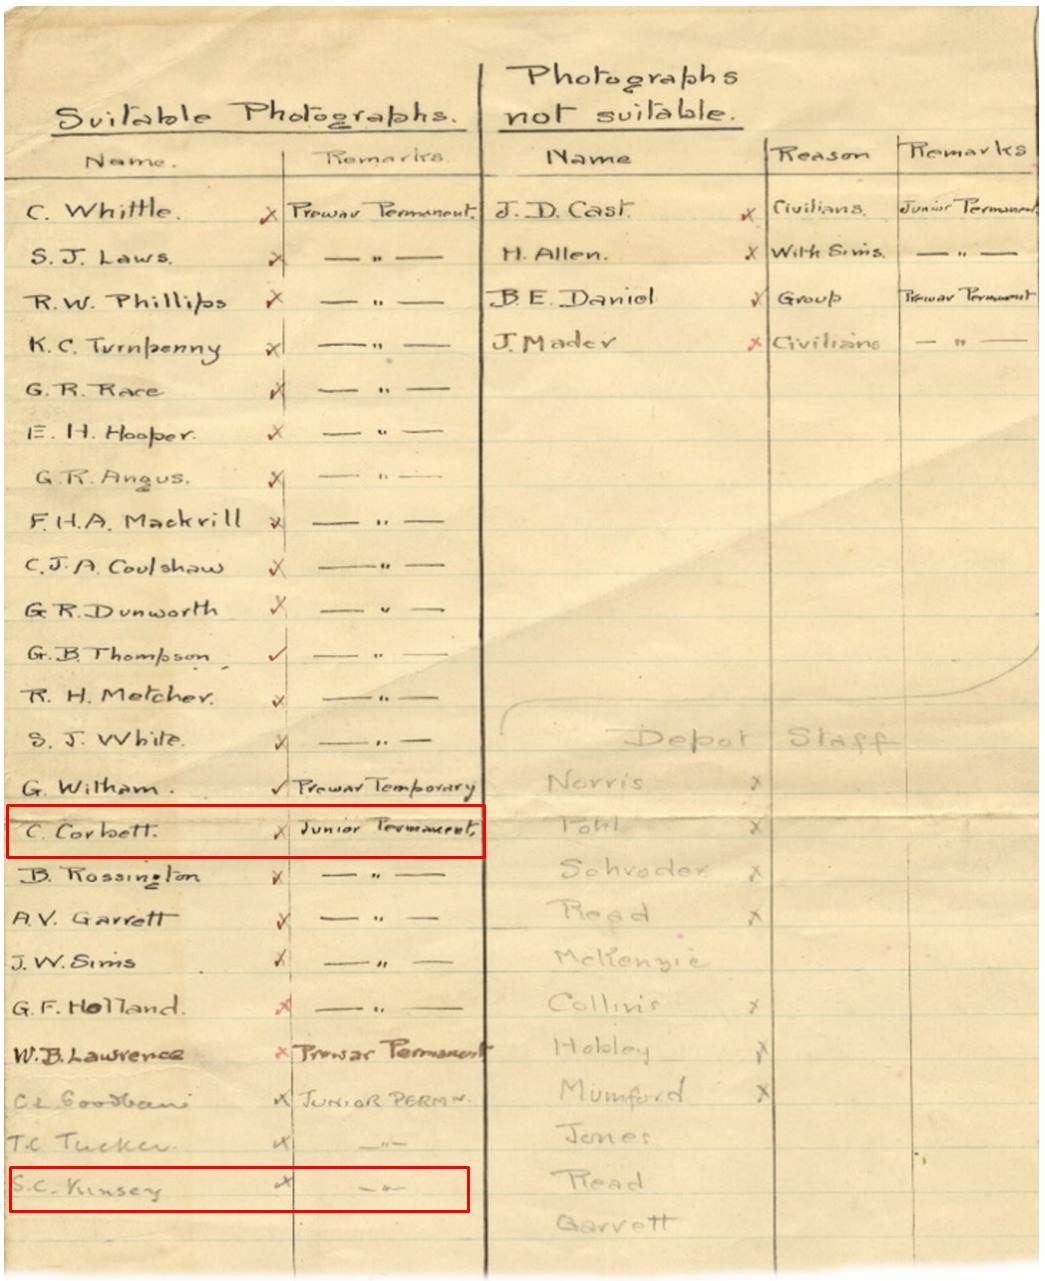 A list of Stores Department personnel who had served in the Great War, identifying who had sent in photos of themselves or not. Both Kinsey and Corbett’s names are listed. (ID no: PLA/PLA/STO/2/1/26)